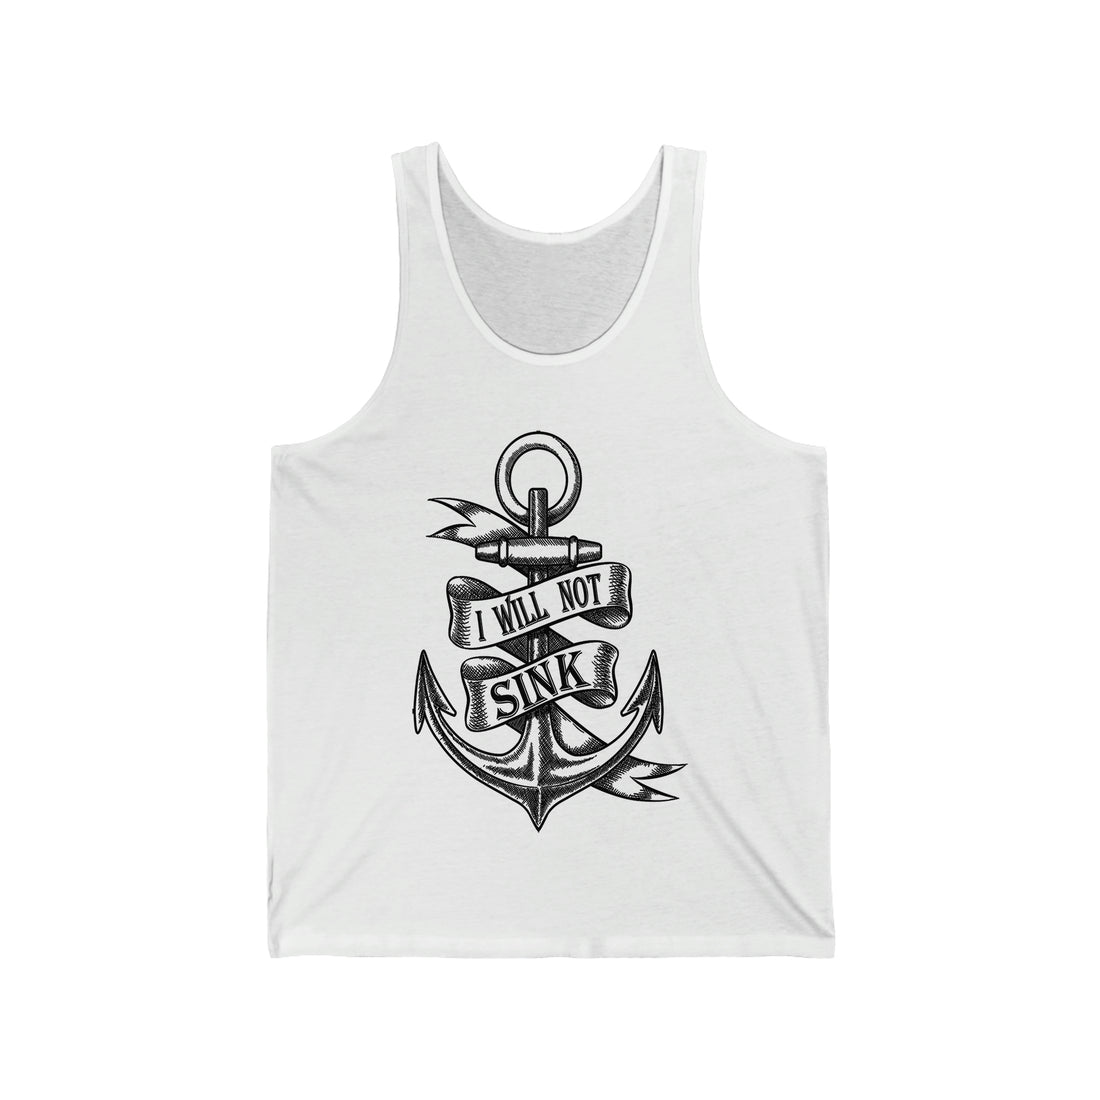 I Will Not Sink - Unisex Jersey Tank Top